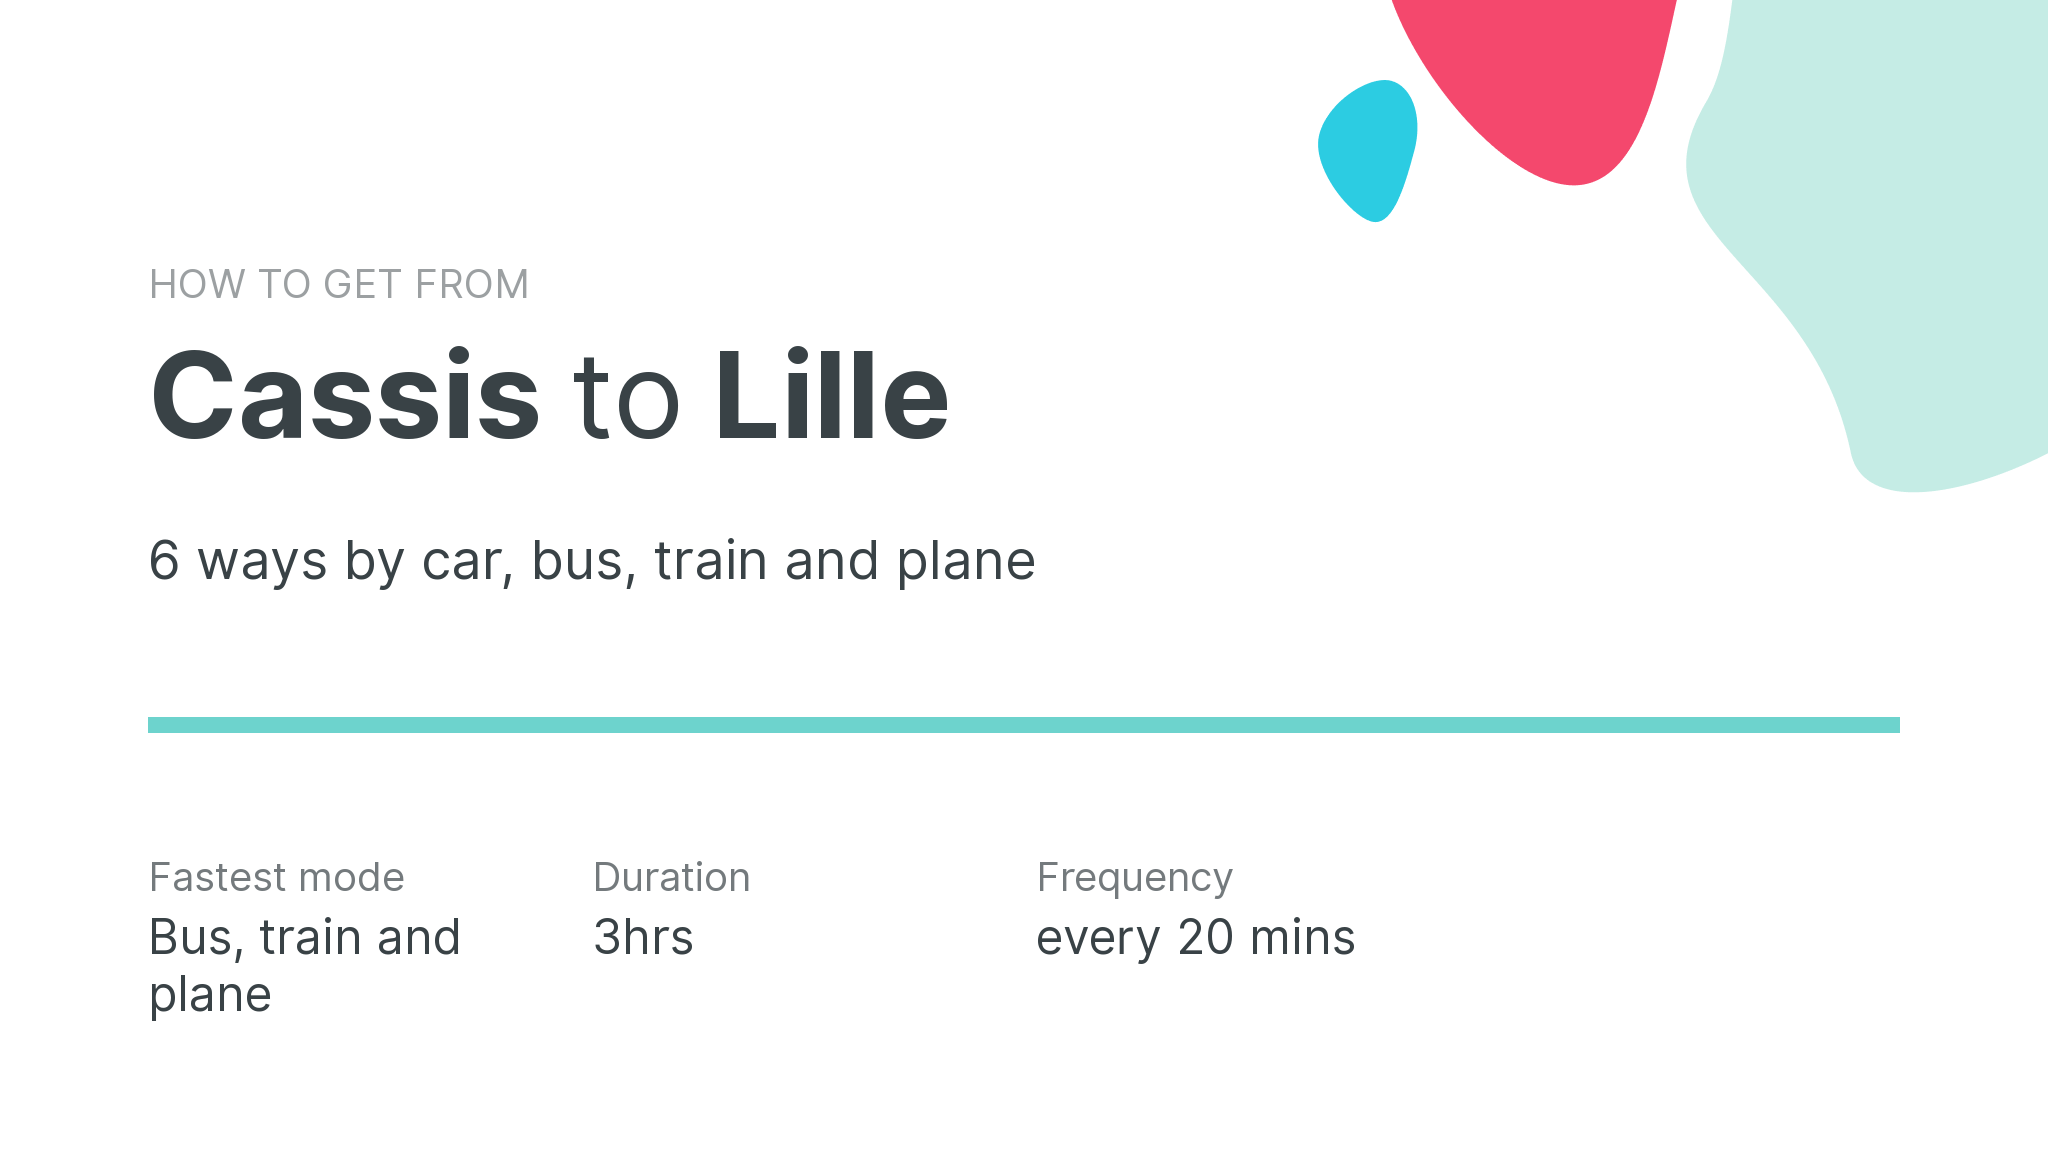 How do I get from Cassis to Lille